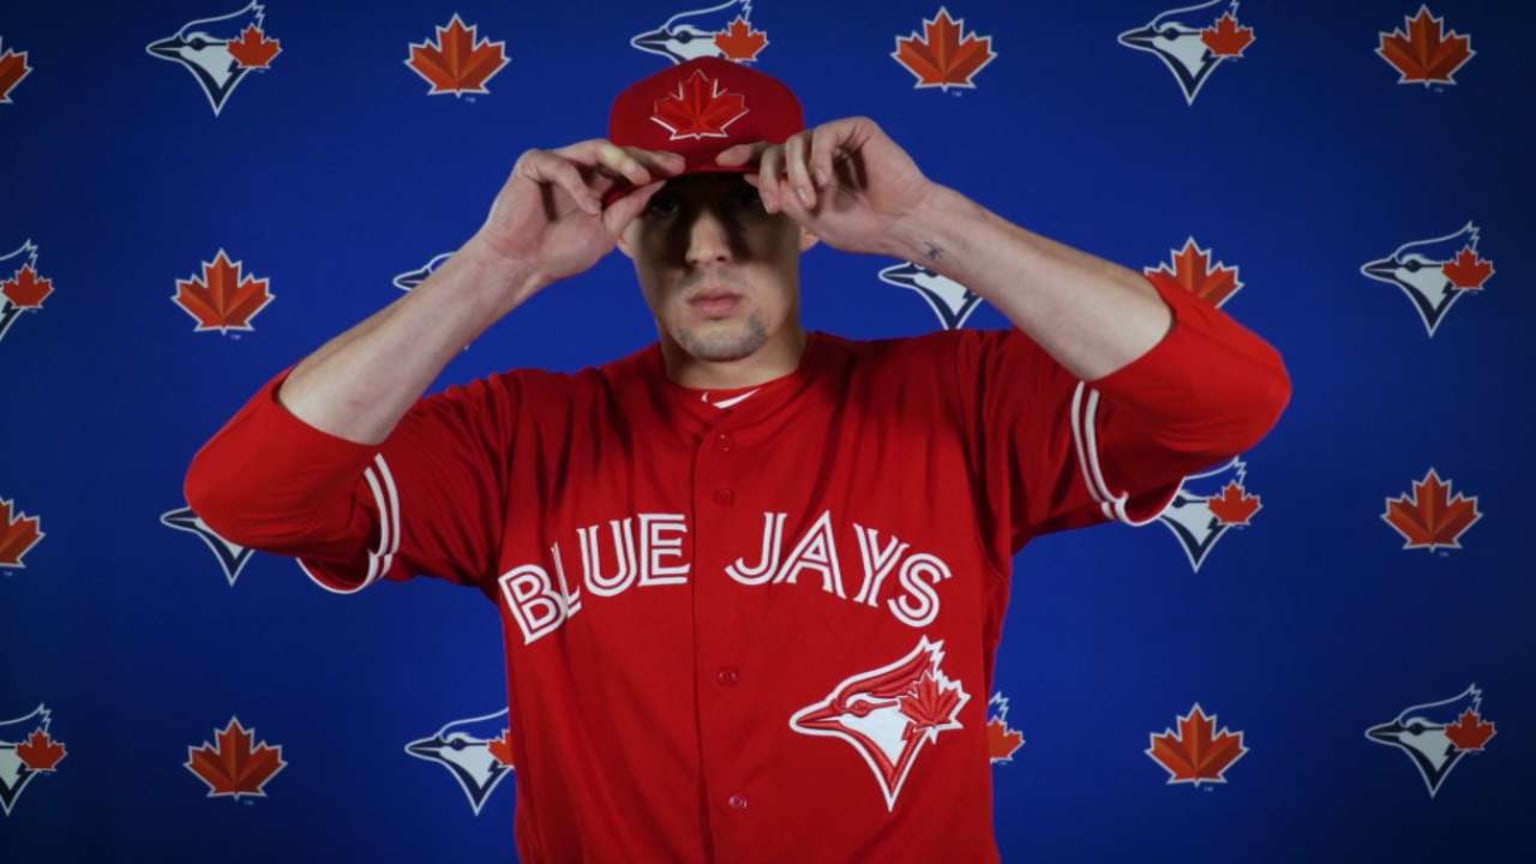 jays red jersey